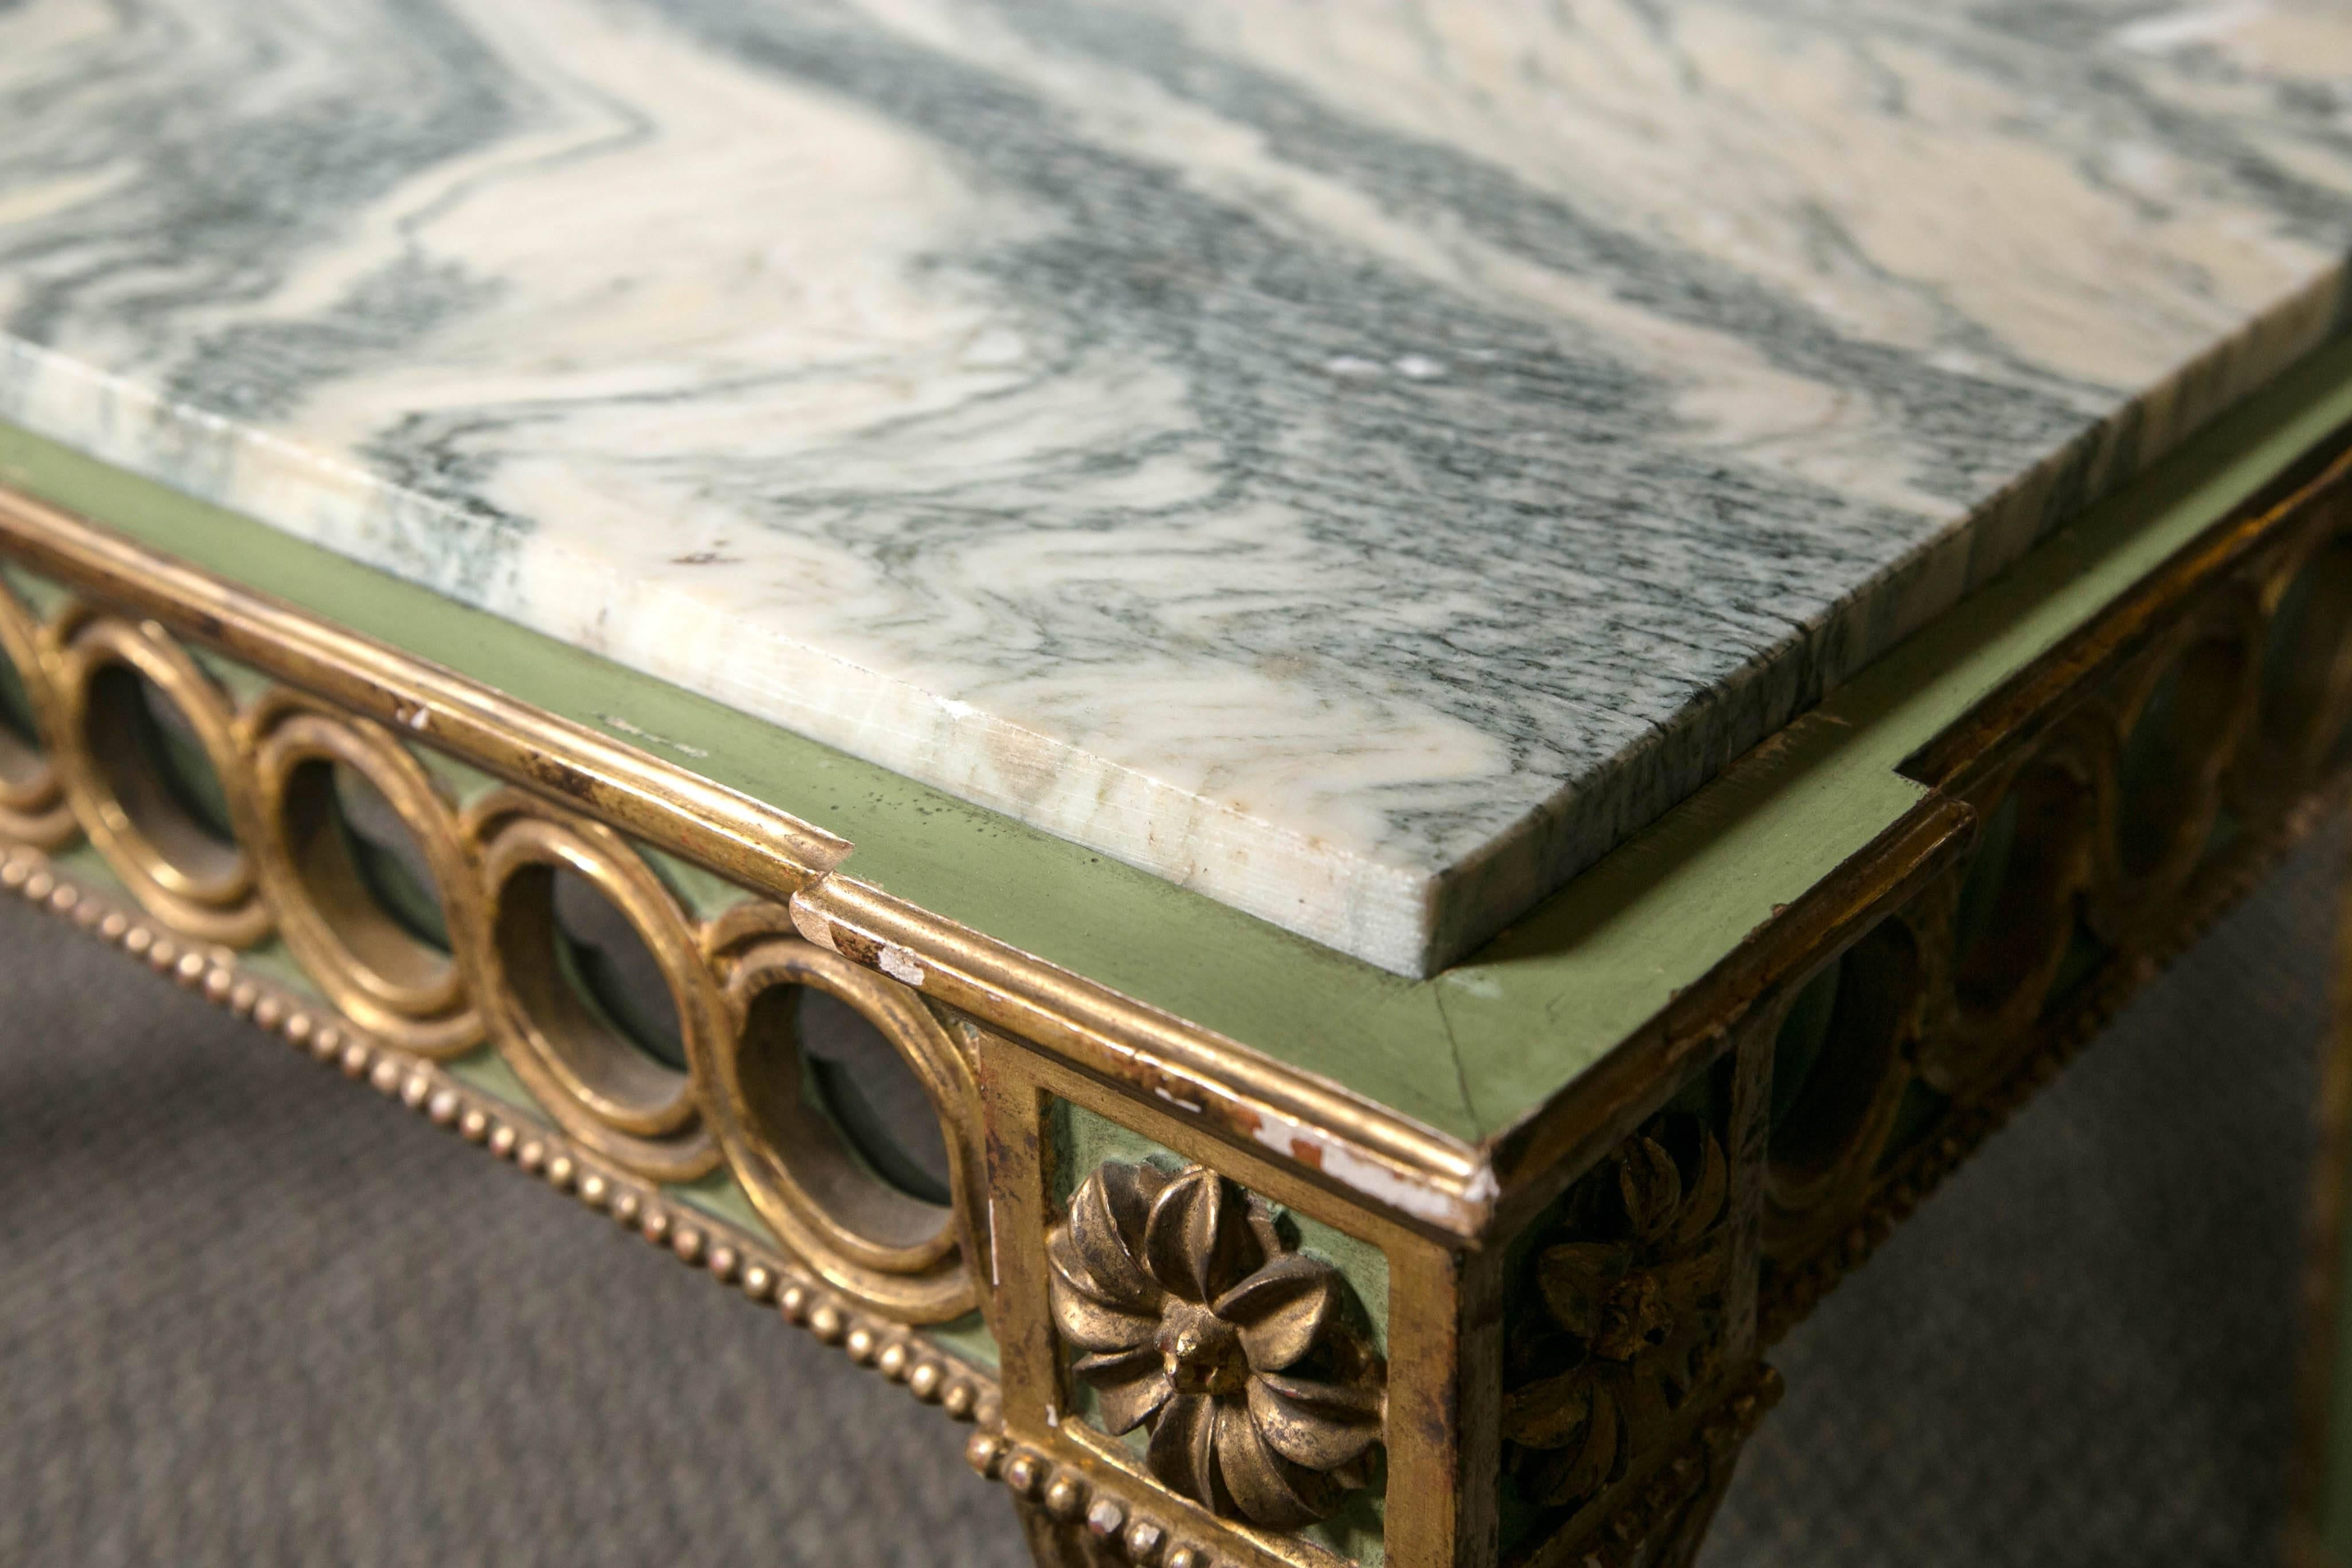 Hollywood Regency paint decorated marble-top coffee table by Jansen. This beautiful French Sage painted coffee table offsets the gilt gold decorations highlighted in the overall design of this wonderfully carved handcrafted table. The incised legs